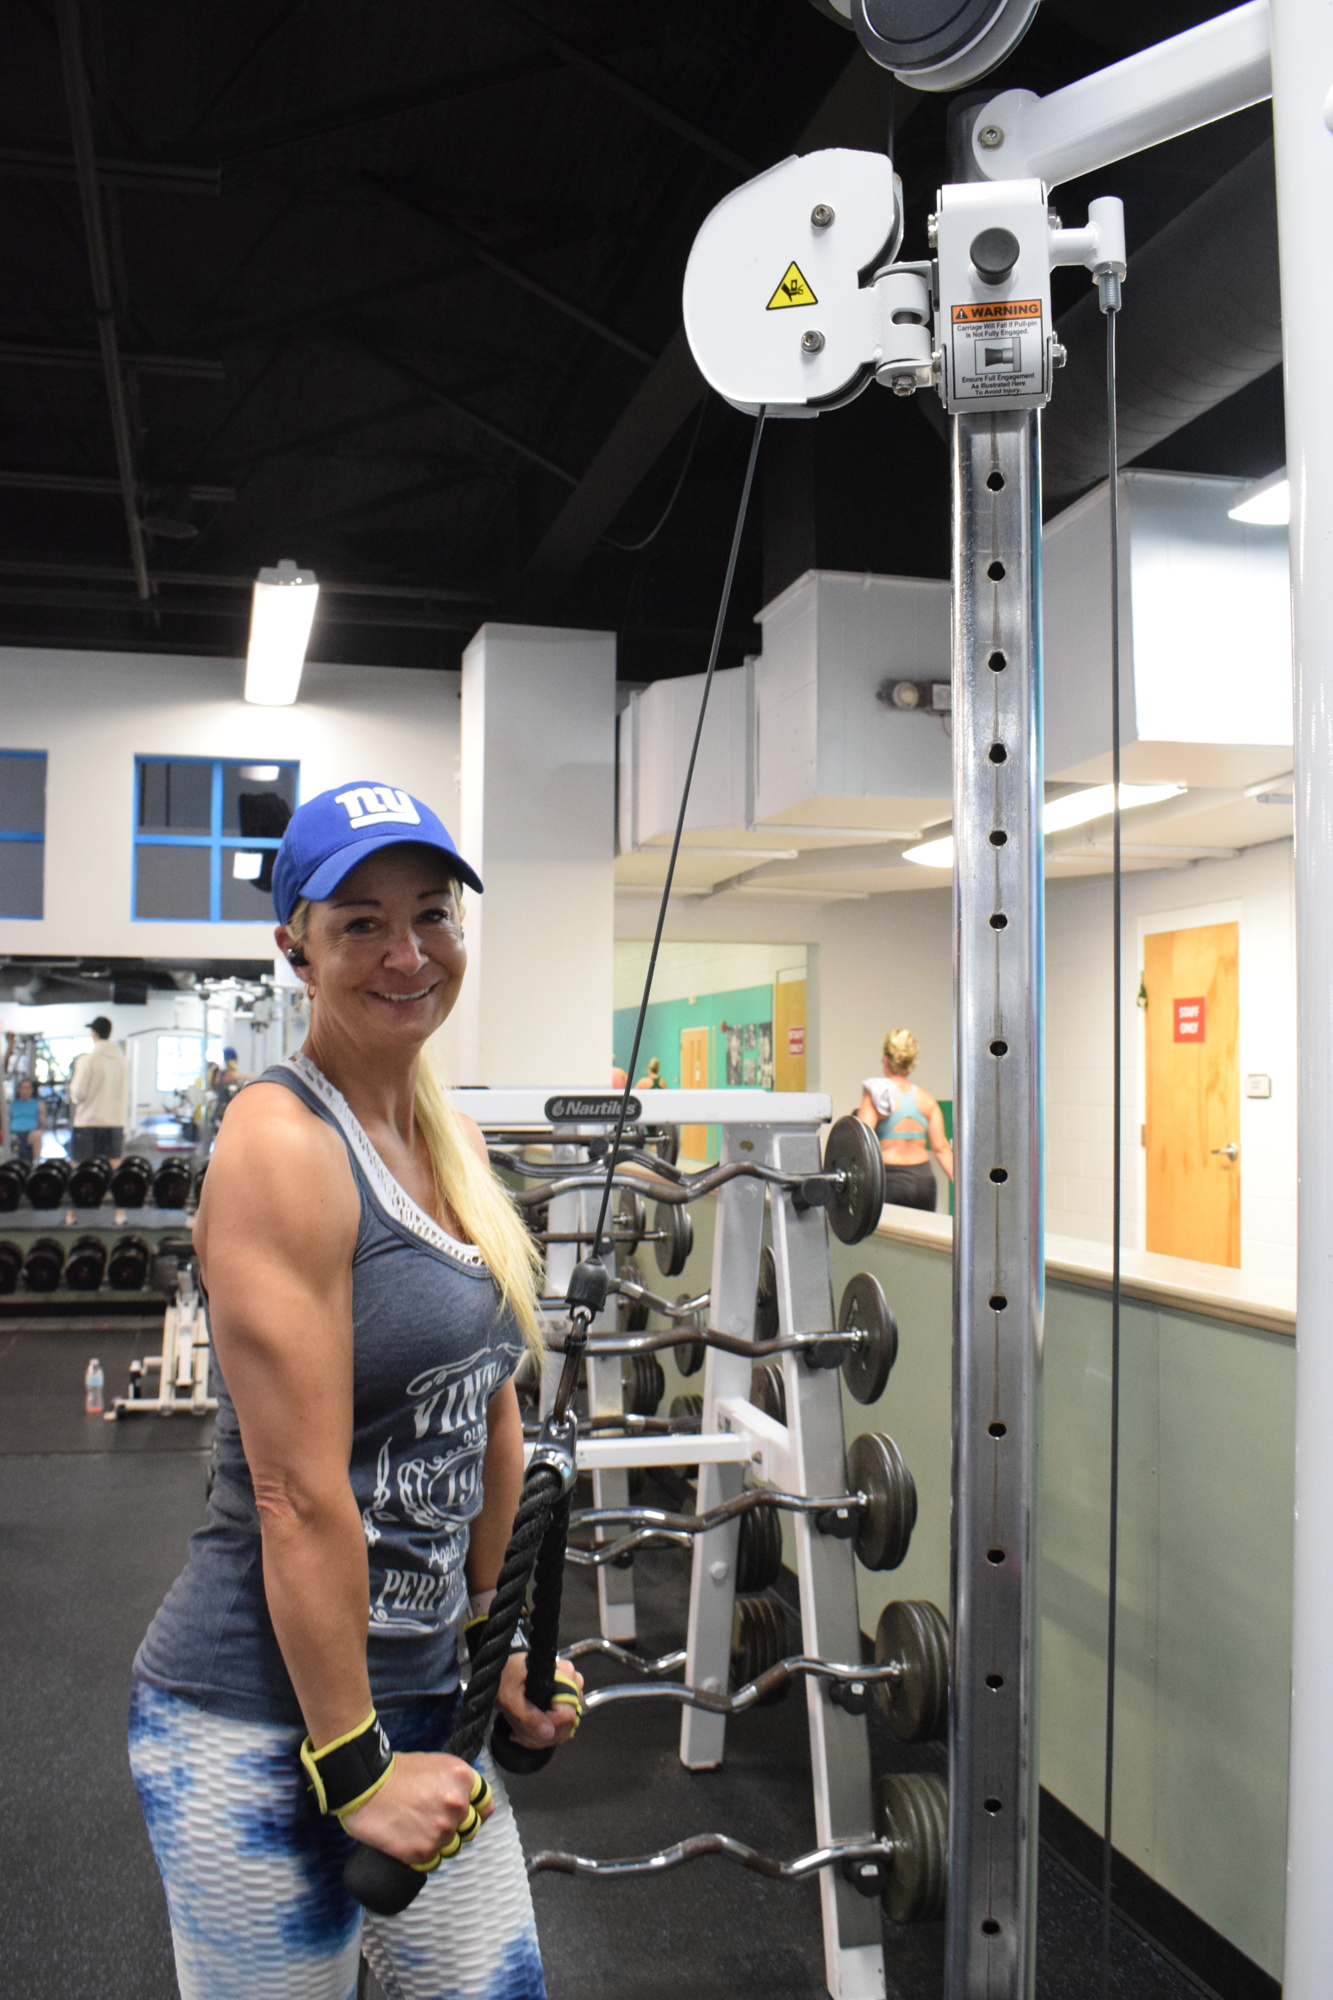 Lakewood Ranch's Noreen Higdon lifts weights at the Lakewood Ranch YMCA. She's excited to see the new programs that will come to the YMCA.